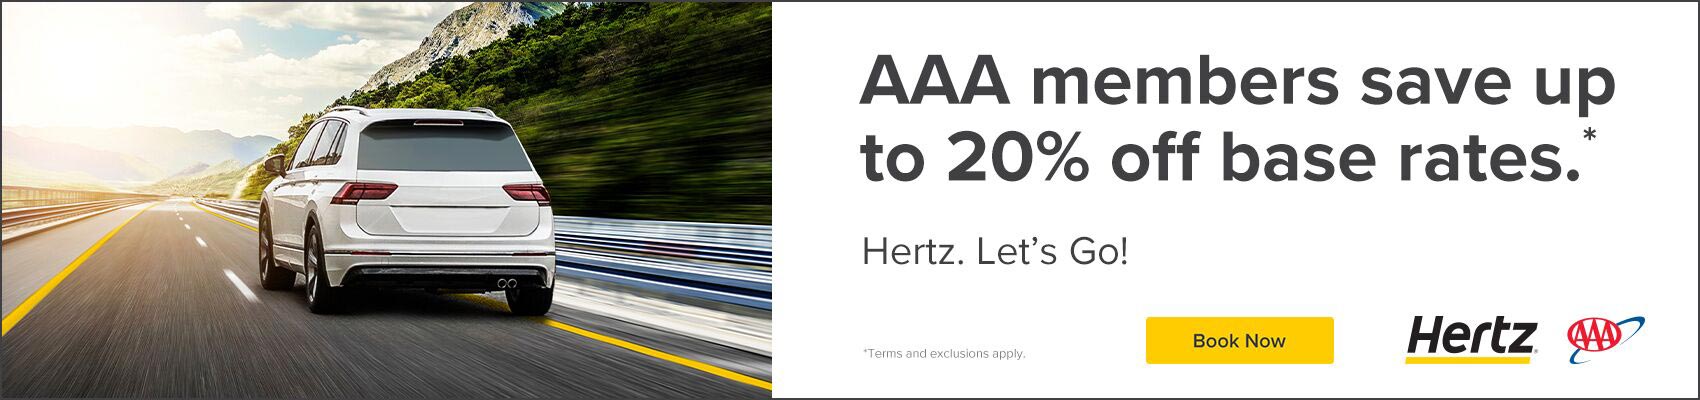 AAA members save up to 20% off base rates. Hertz, let's go! Terms and exclusions apply.